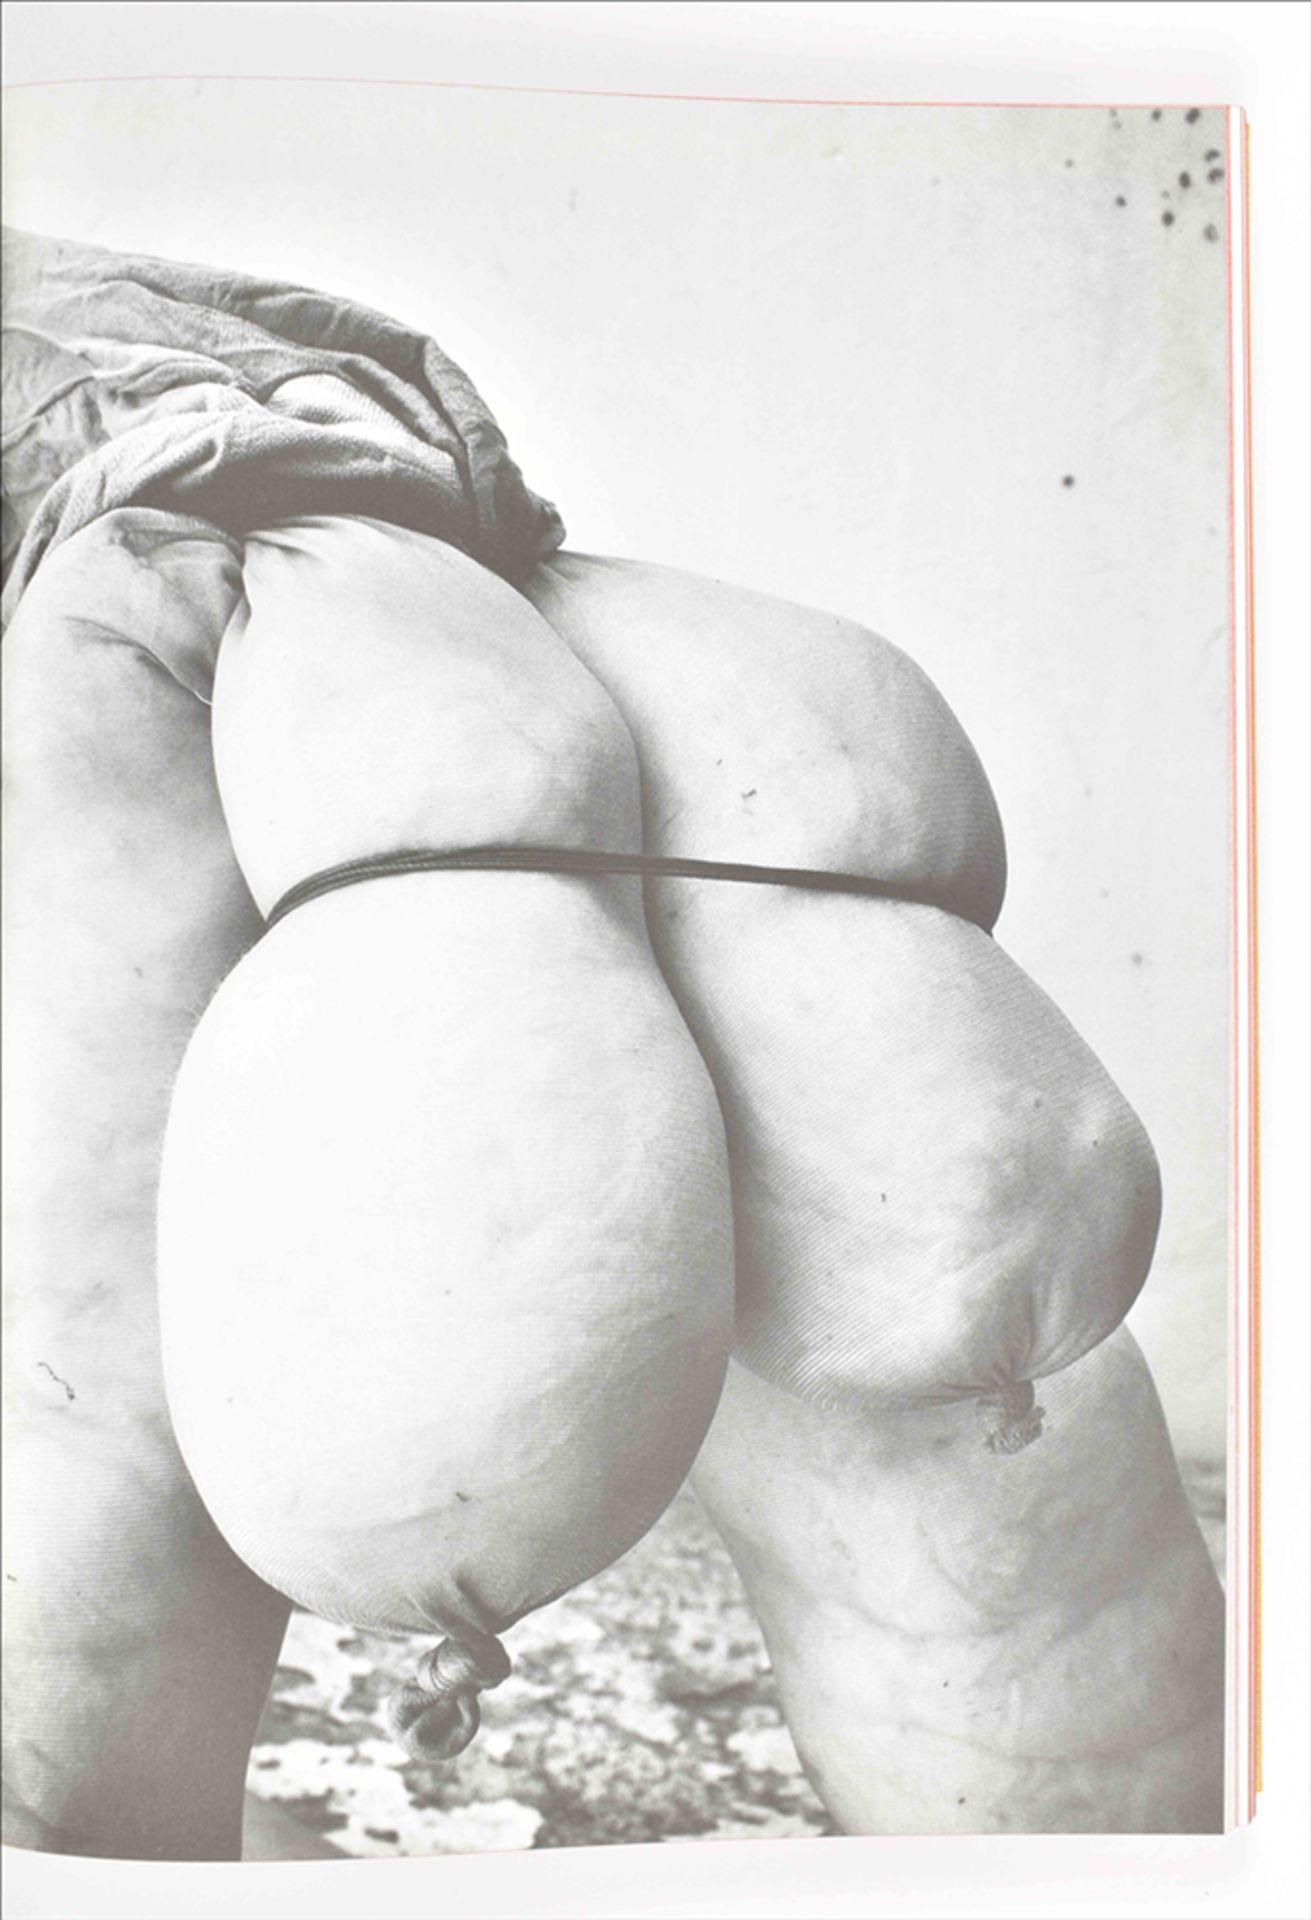 Sarah Lucas, two artists' publications - Image 5 of 8